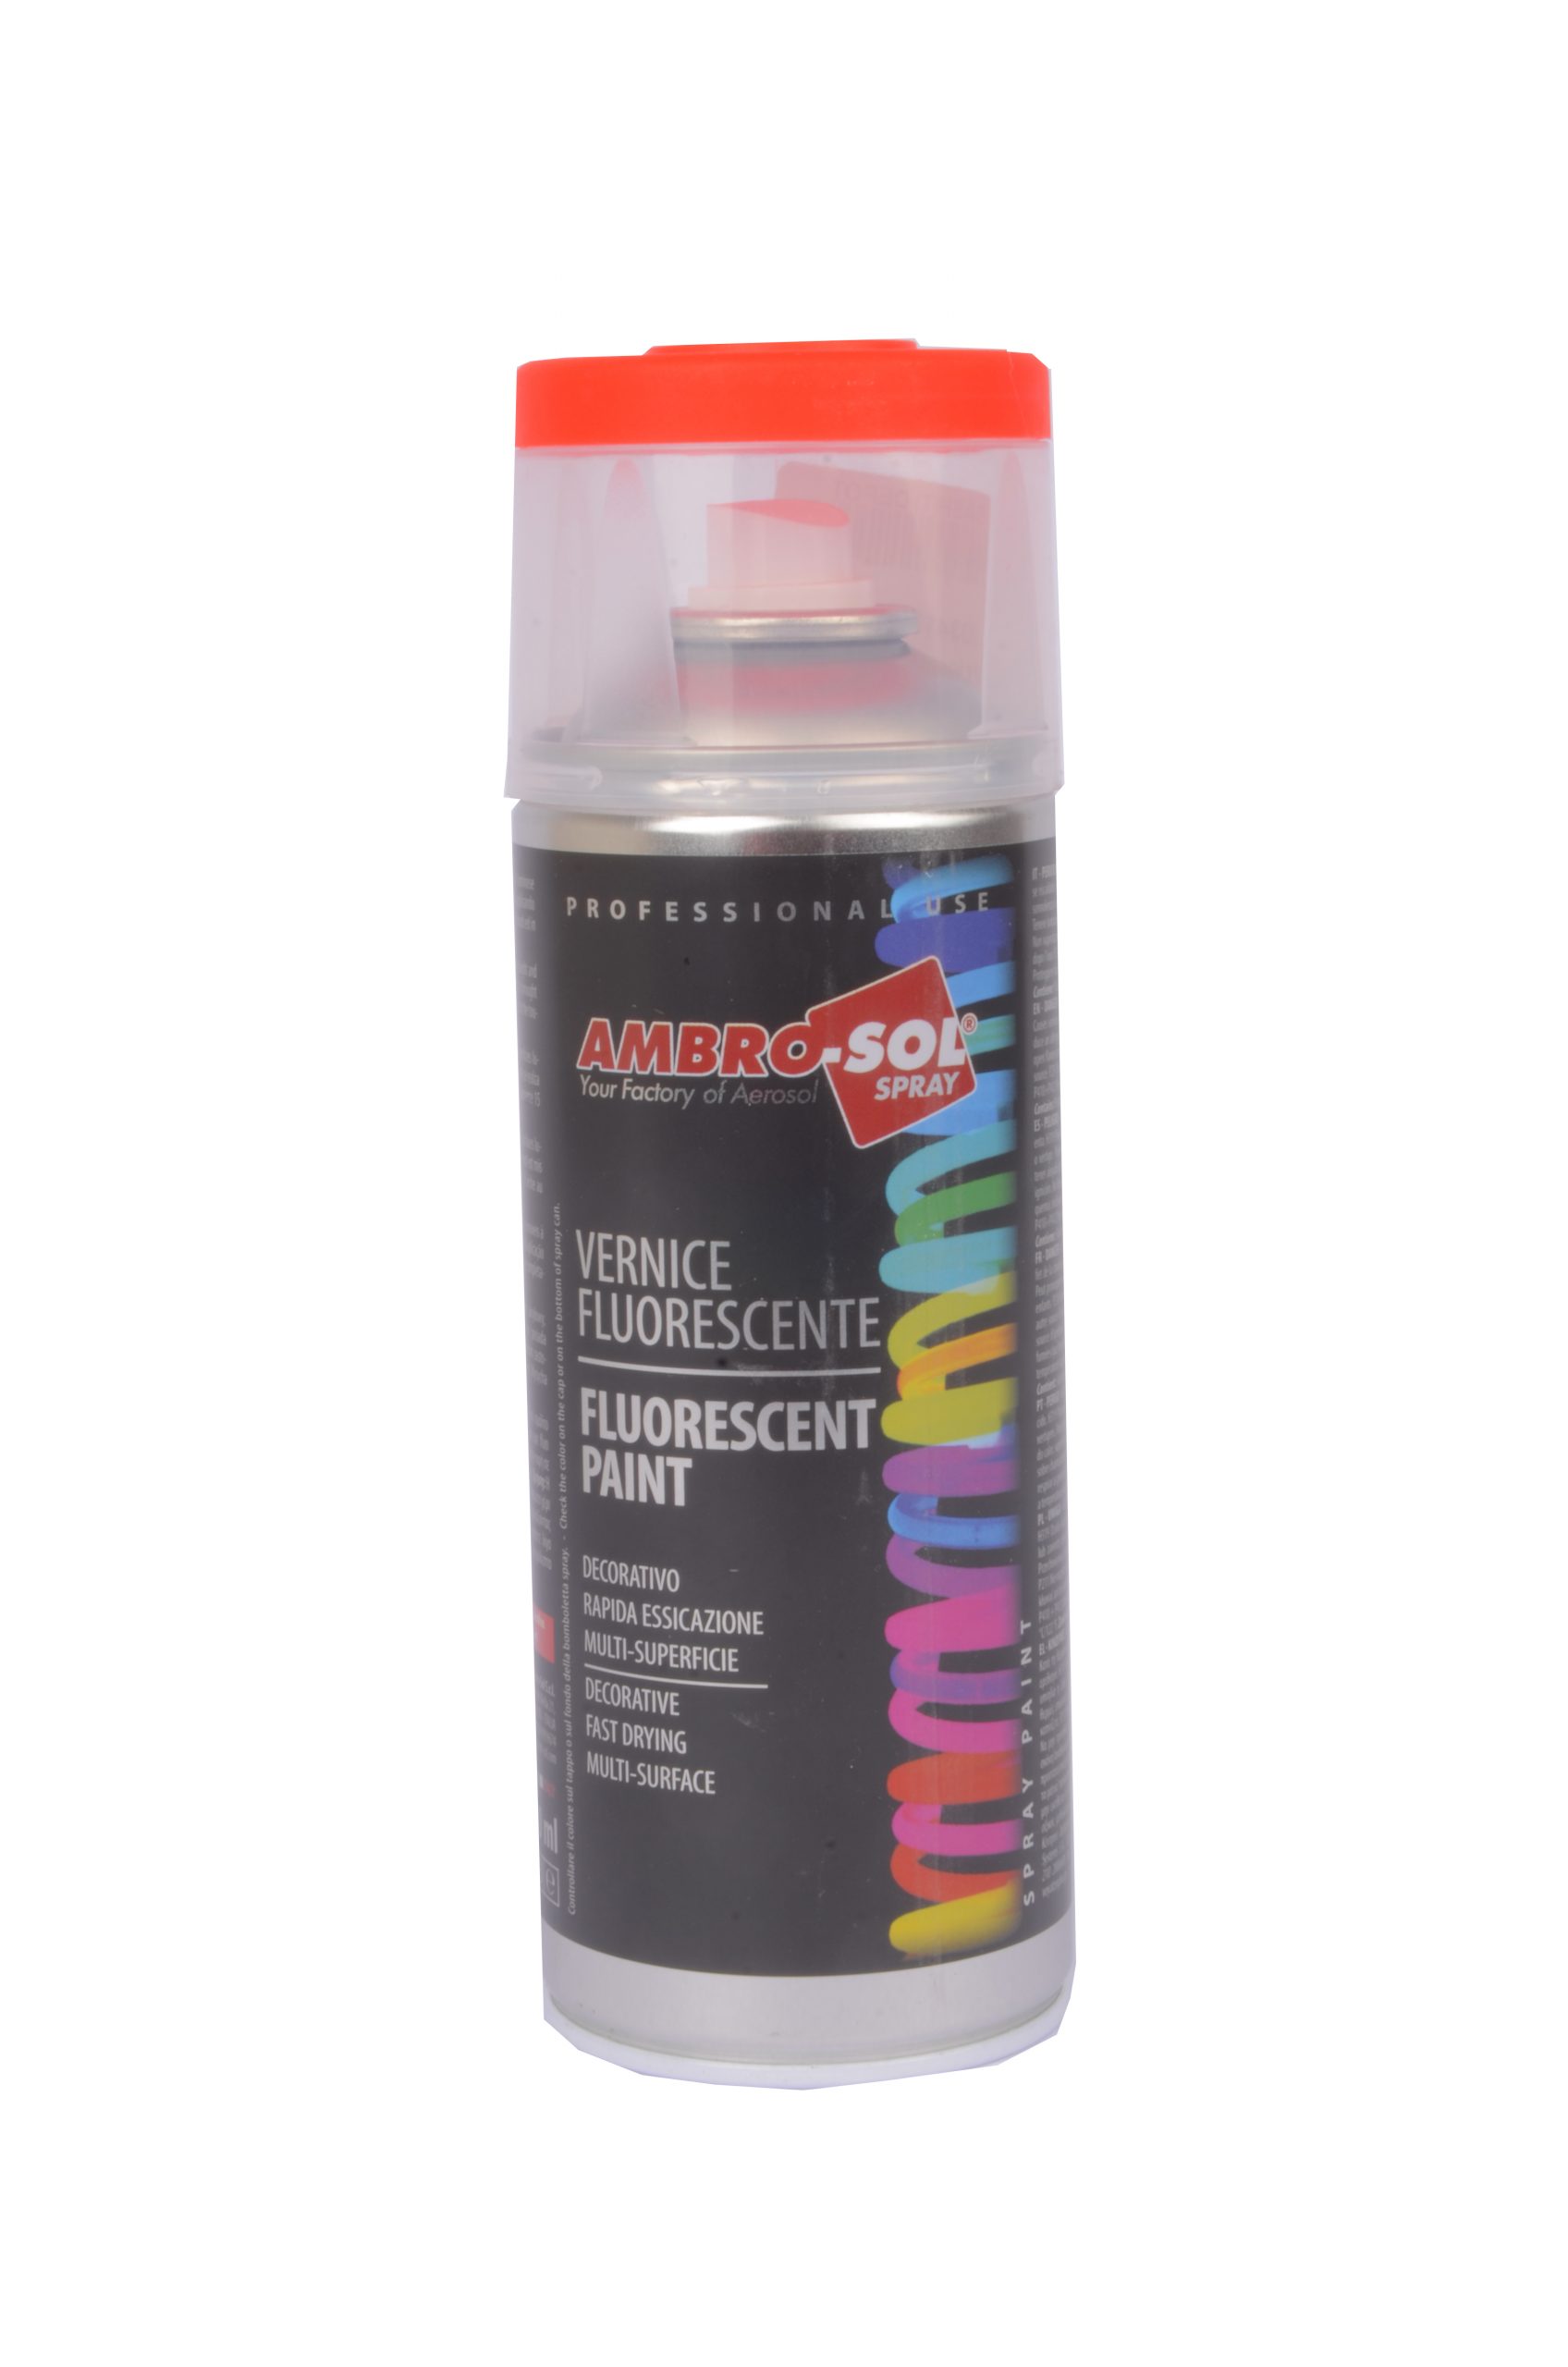 Ambrosol 
	
	Fluorescent Effect Paint Red
	 |  Spray Paints |  Florescent Spray Paints |  Paints